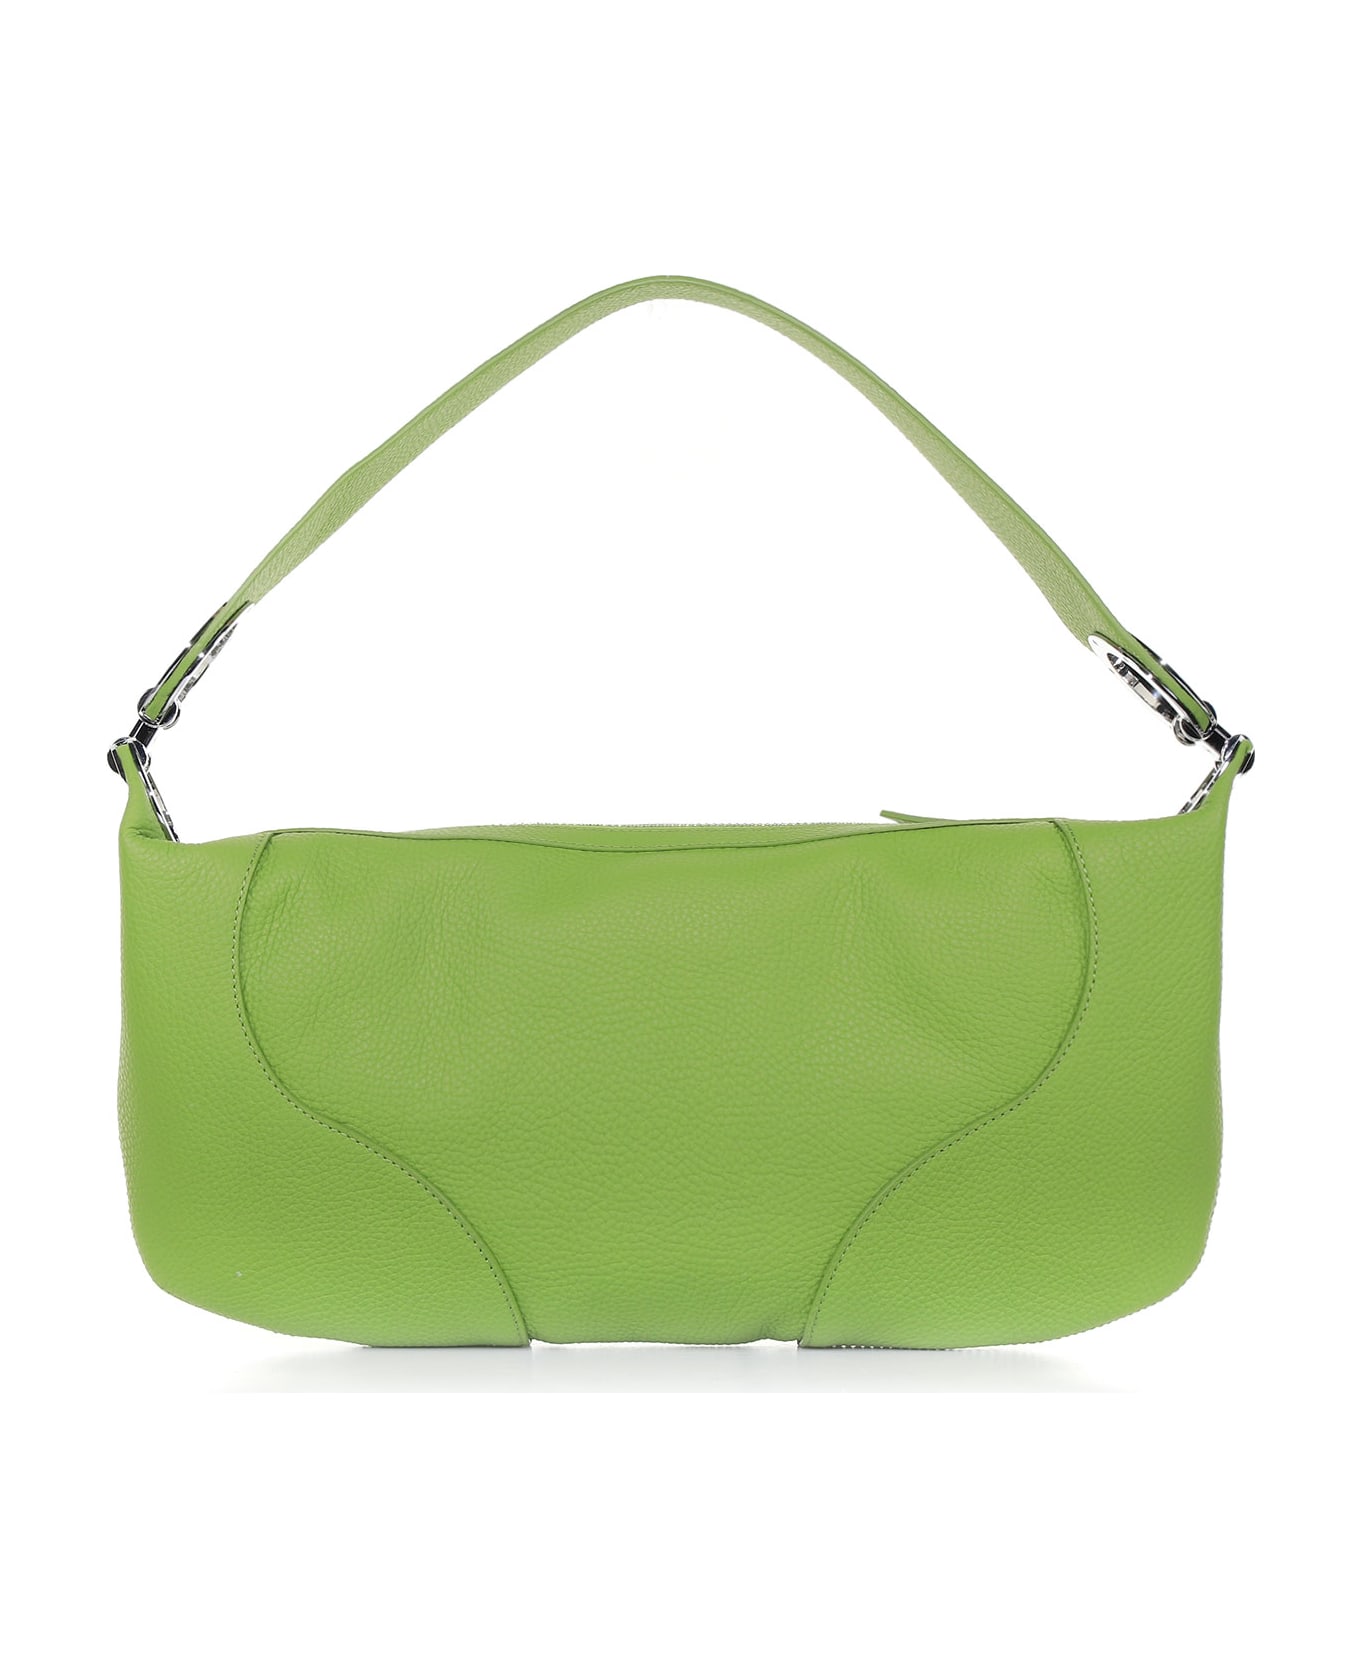 BY FAR Amira Leather Bag - LIME GREEN